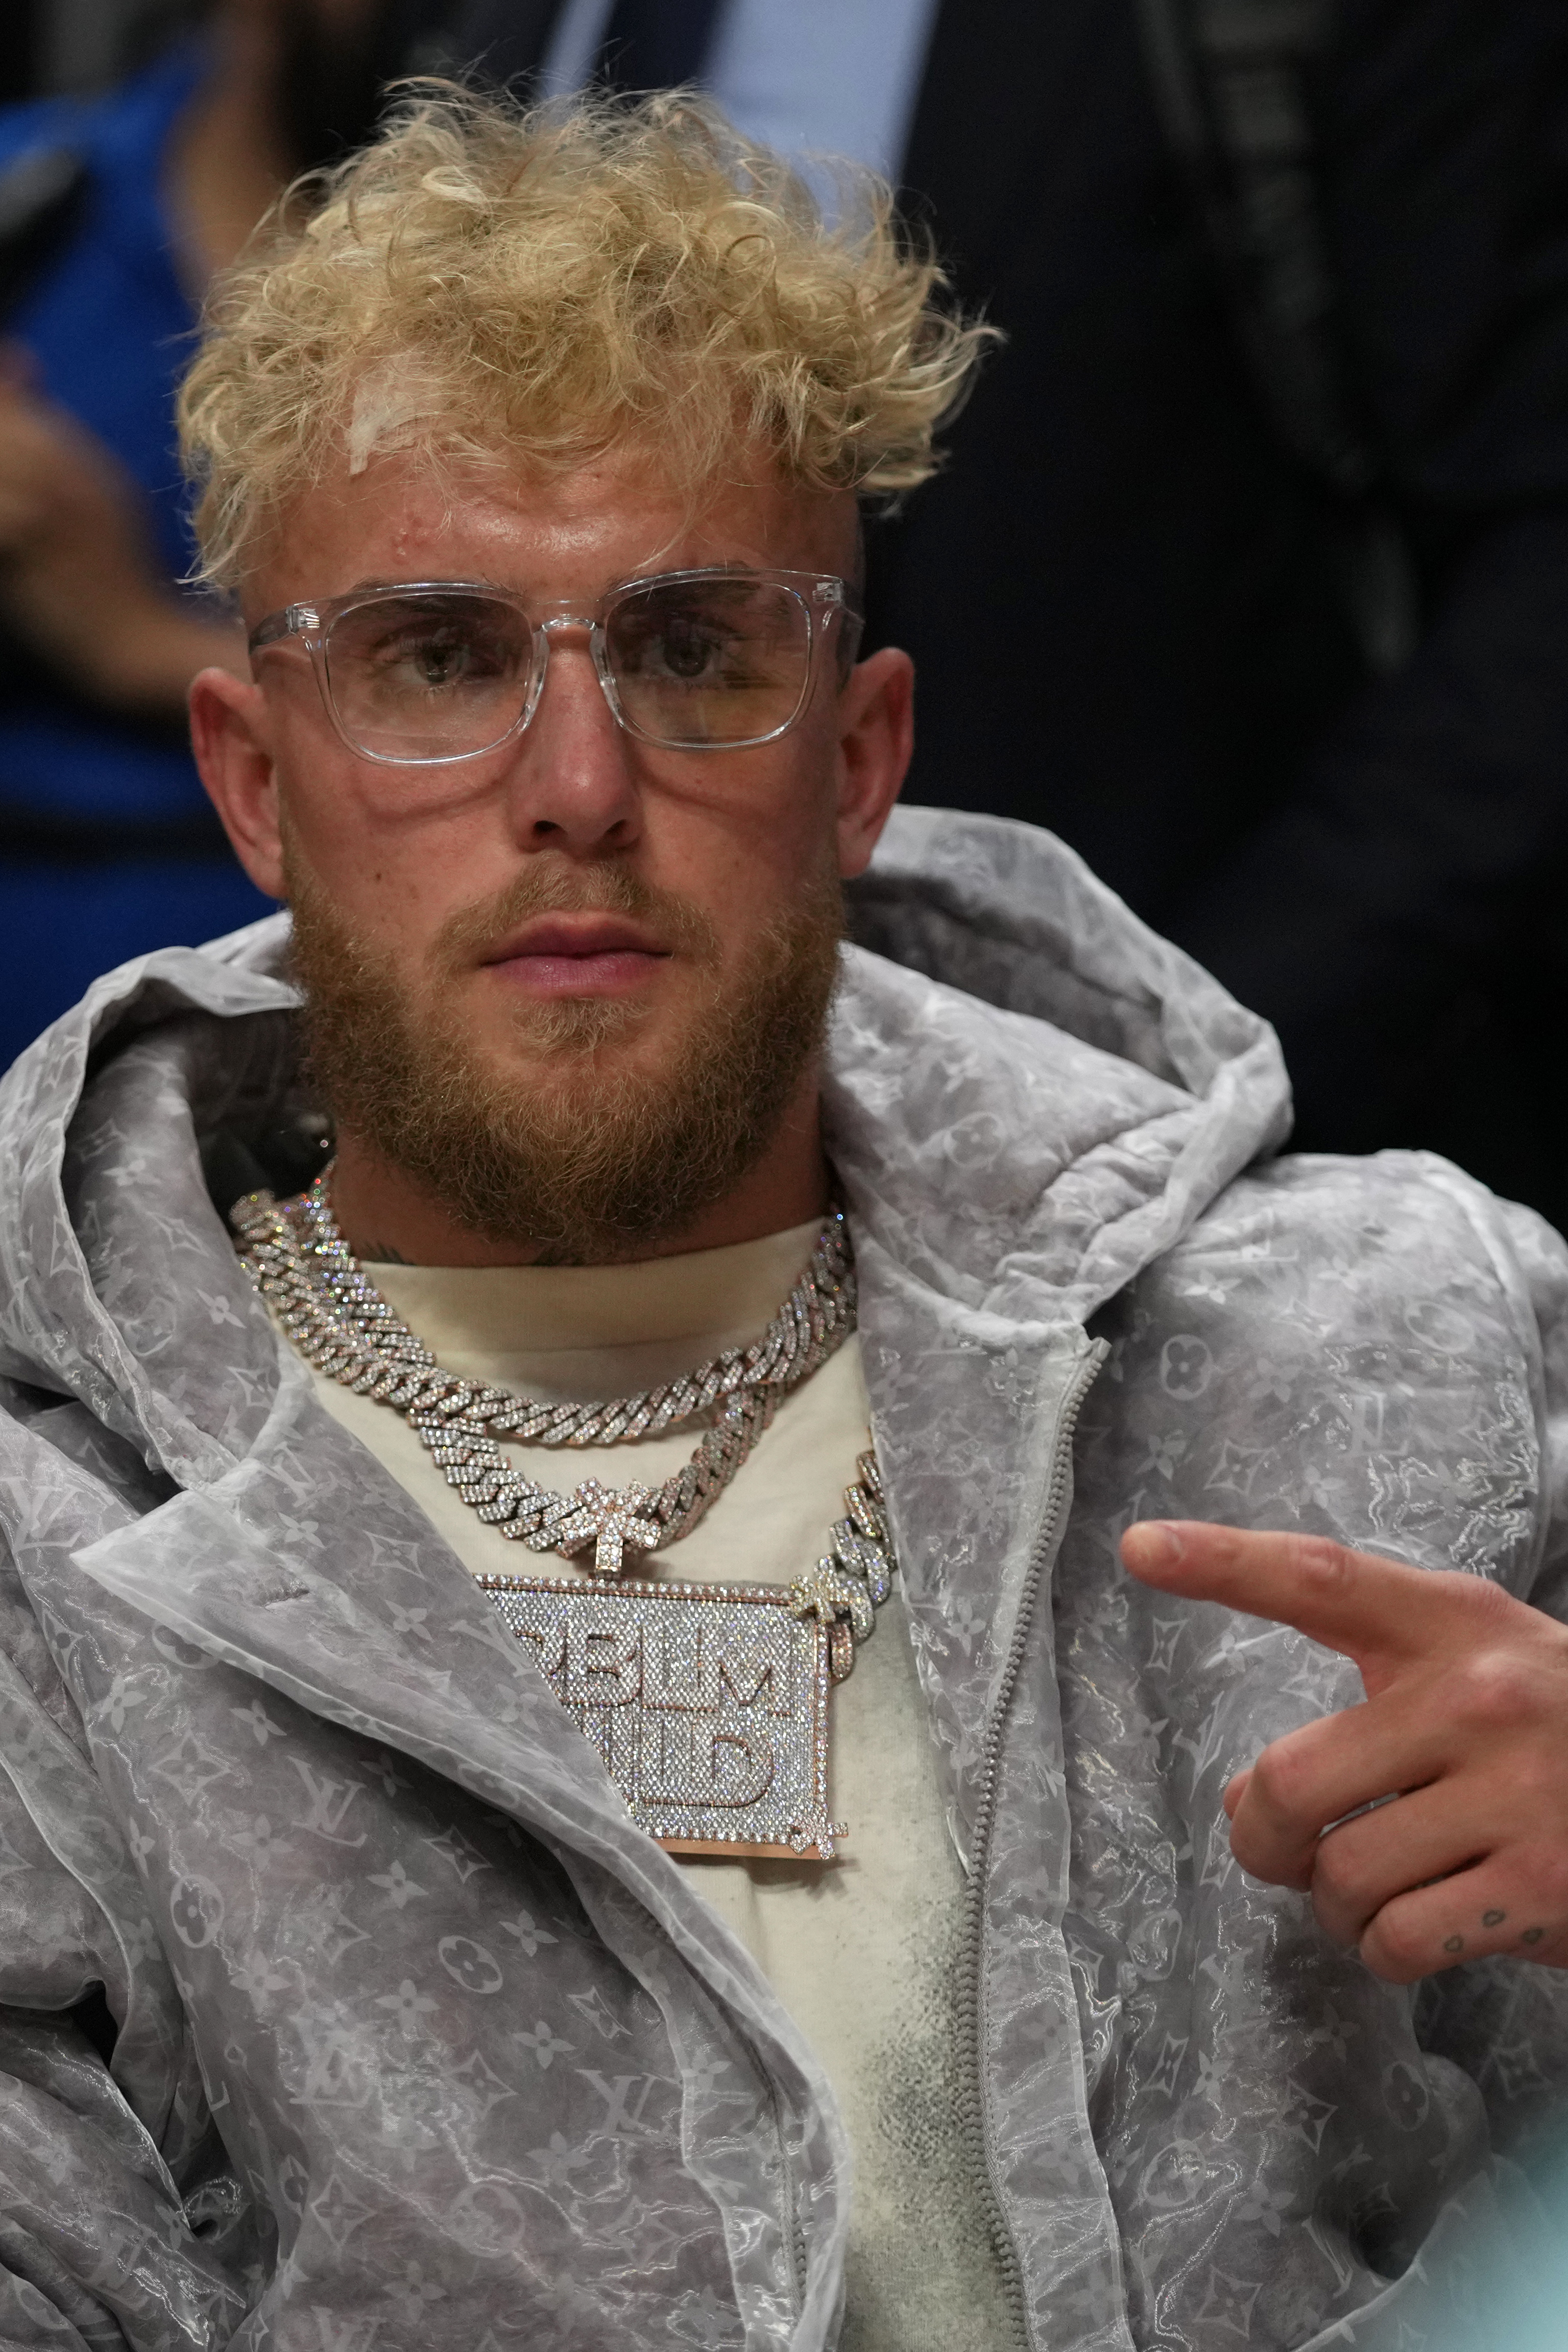 YouTube personality and boxer Jake Paul sits court-side during the second half between the Miami Heat and the Detroit Pistons at FTX Arena.